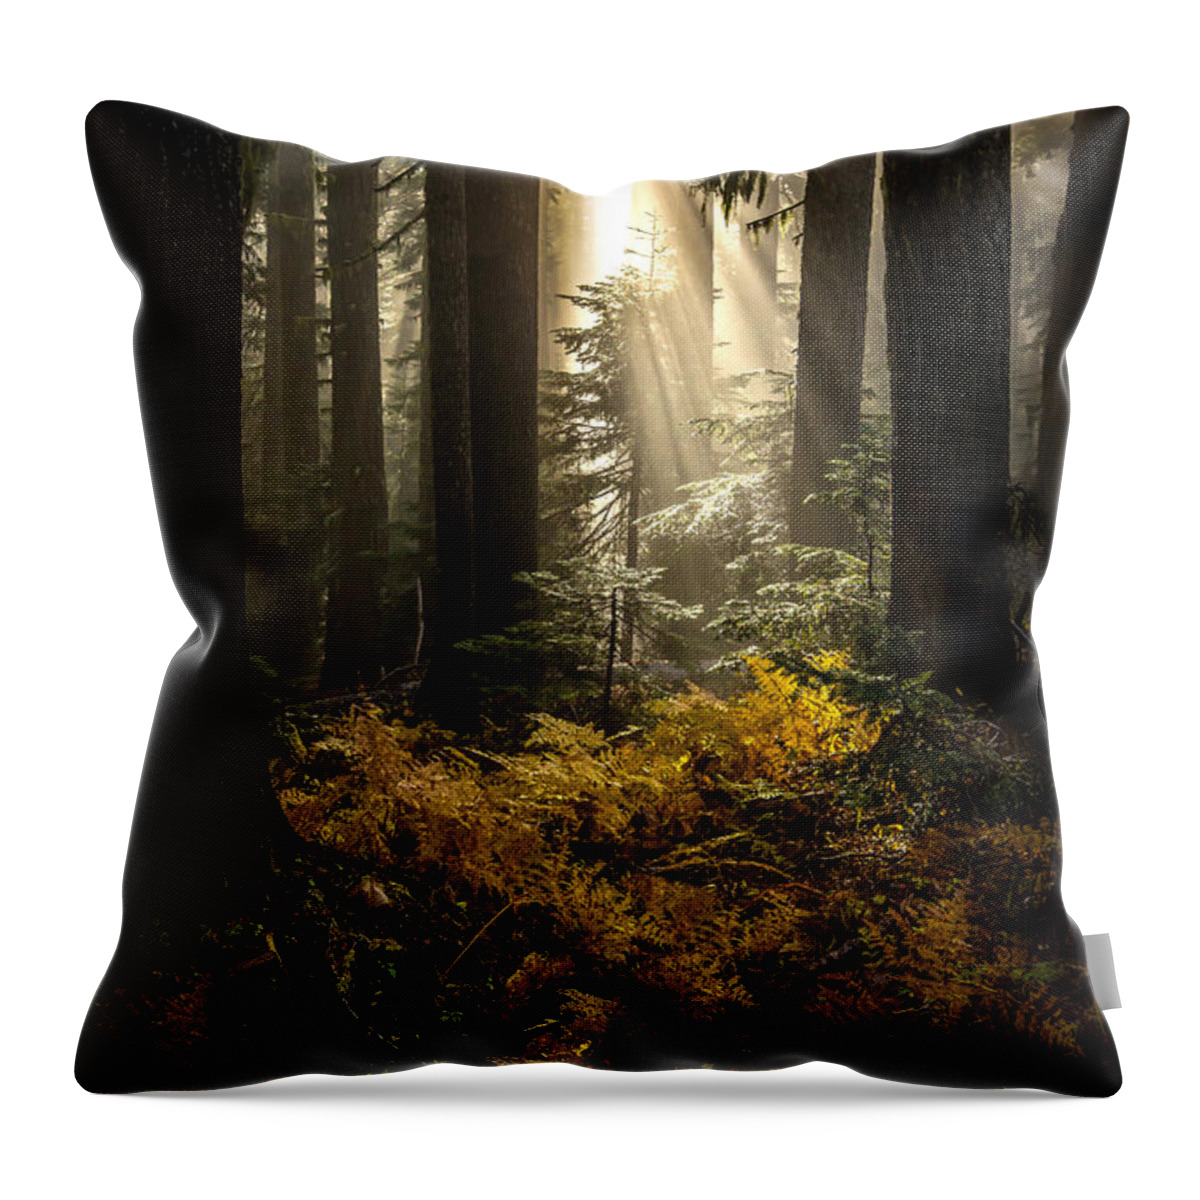 Serenity Throw Pillow featuring the photograph Serenity by Ryan Smith